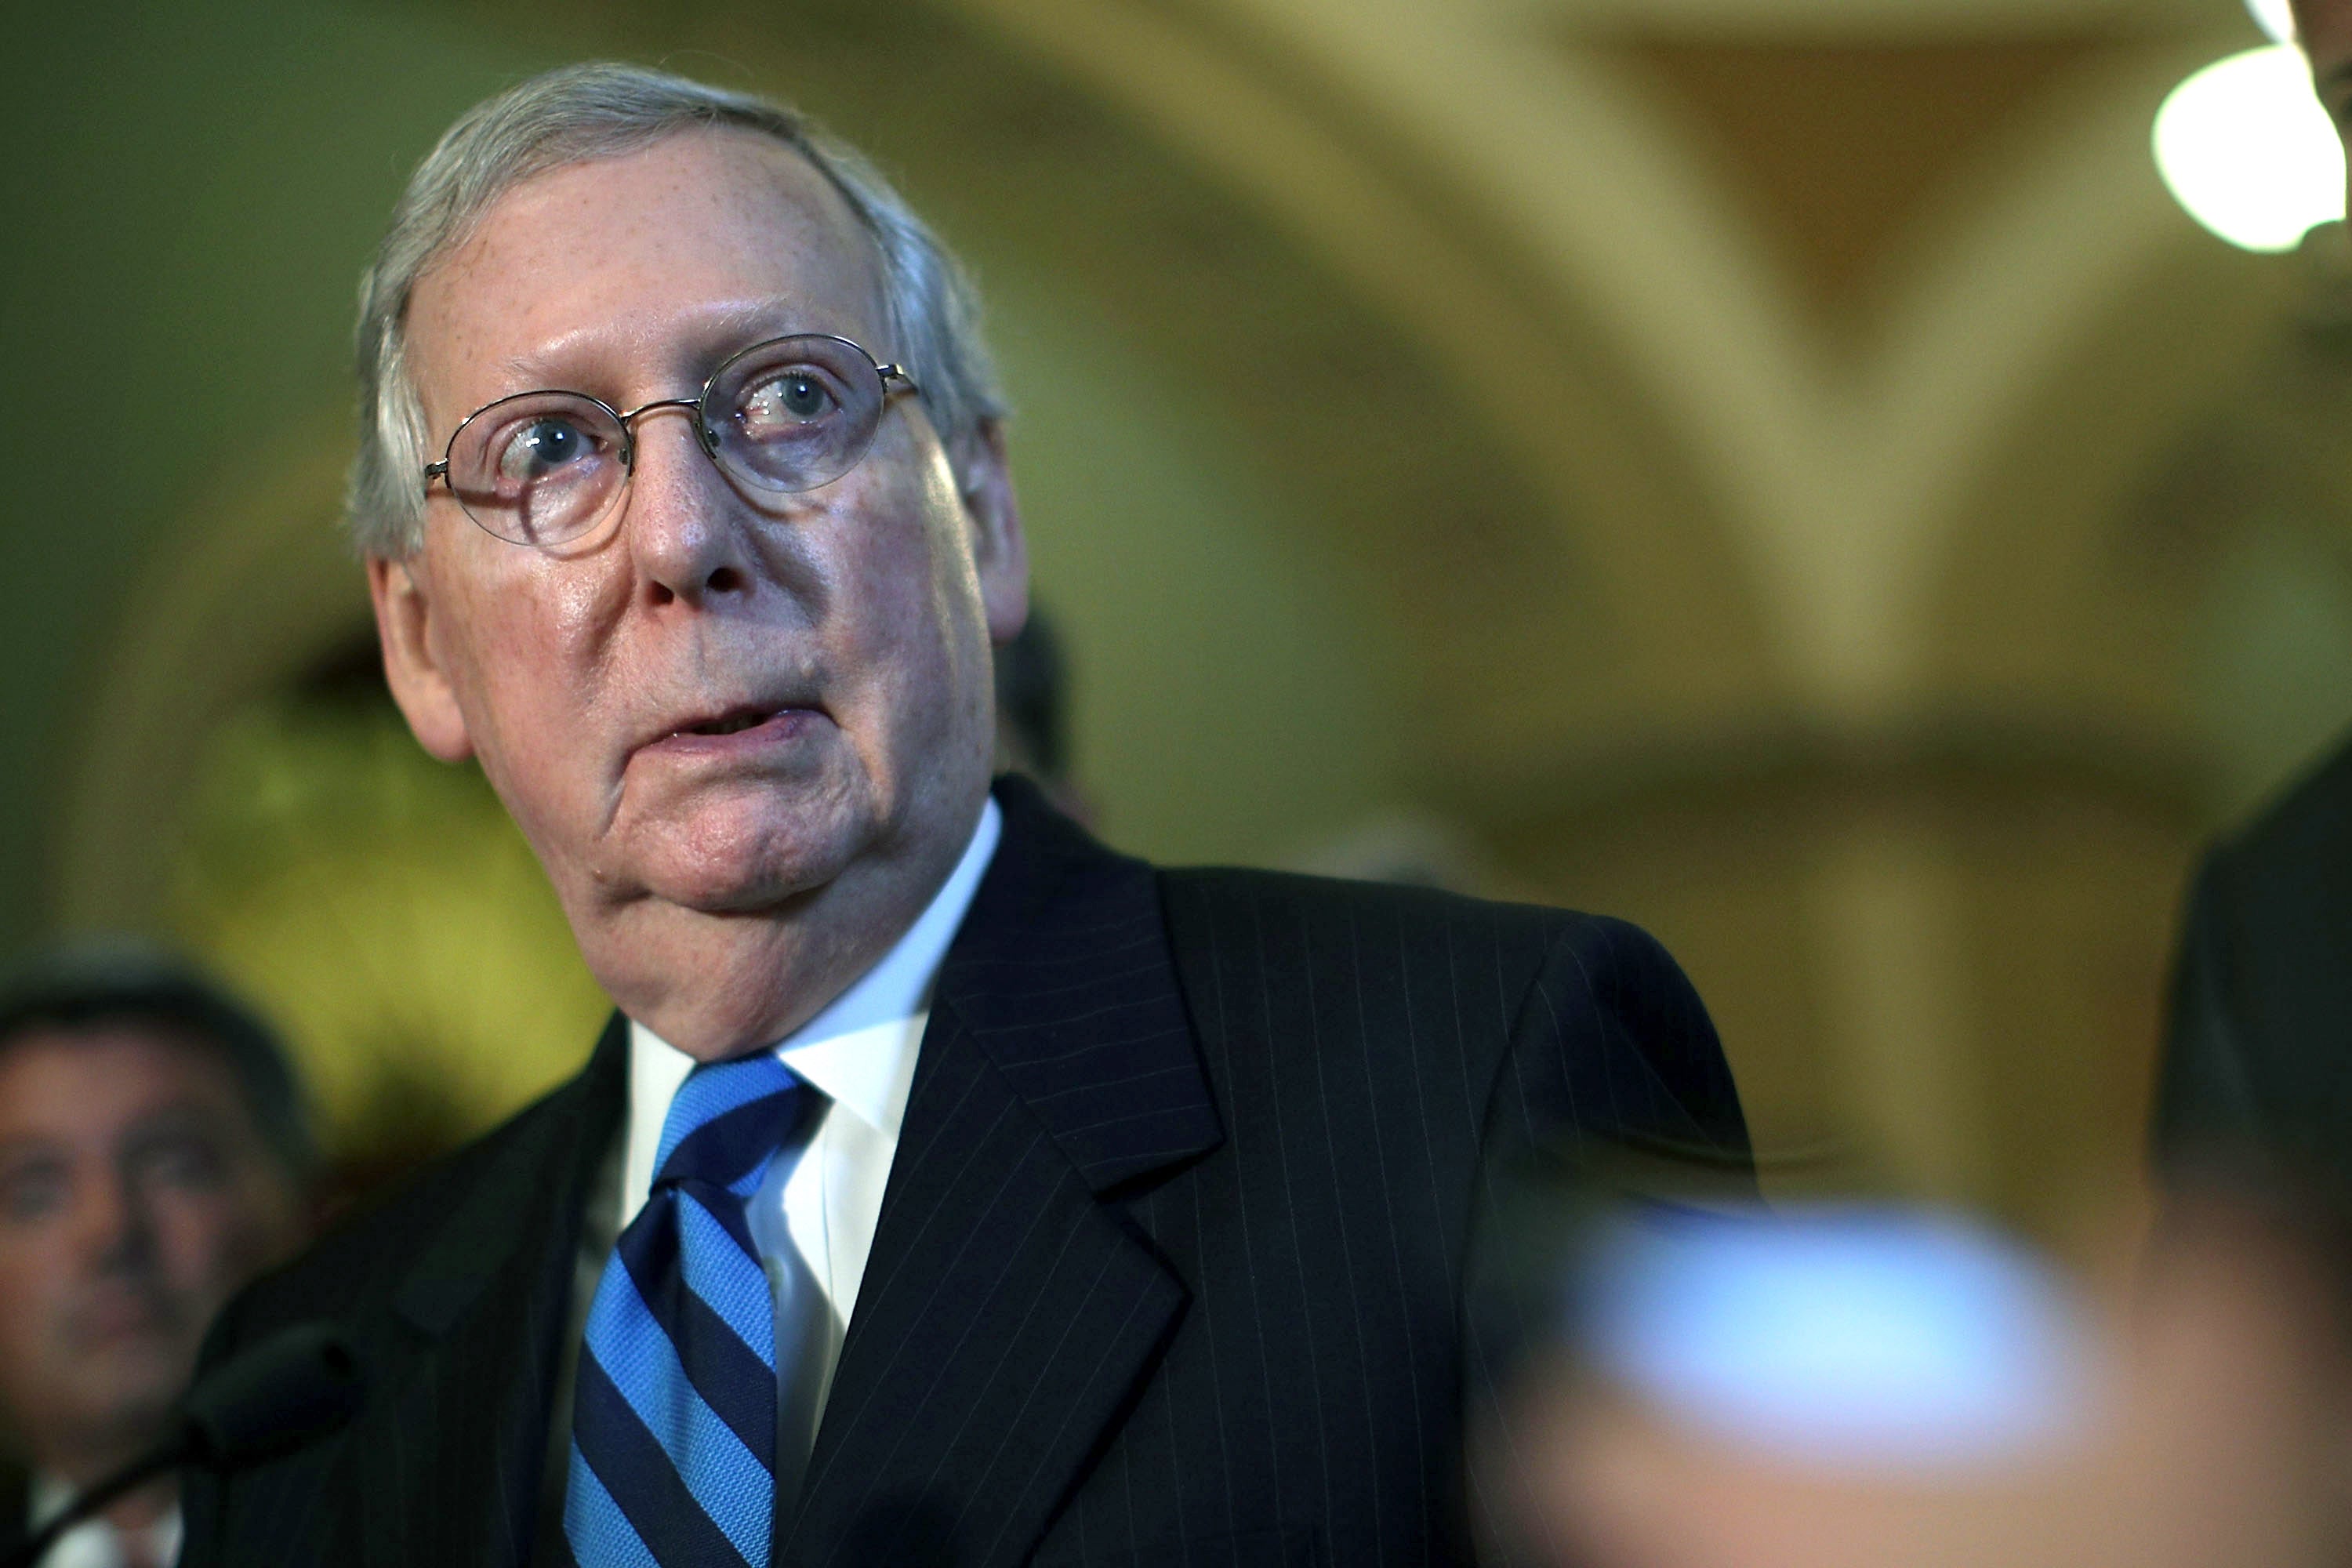 Senate Majority Leader Mitch McConnell gave no indication the government will not shutdown at midnight.